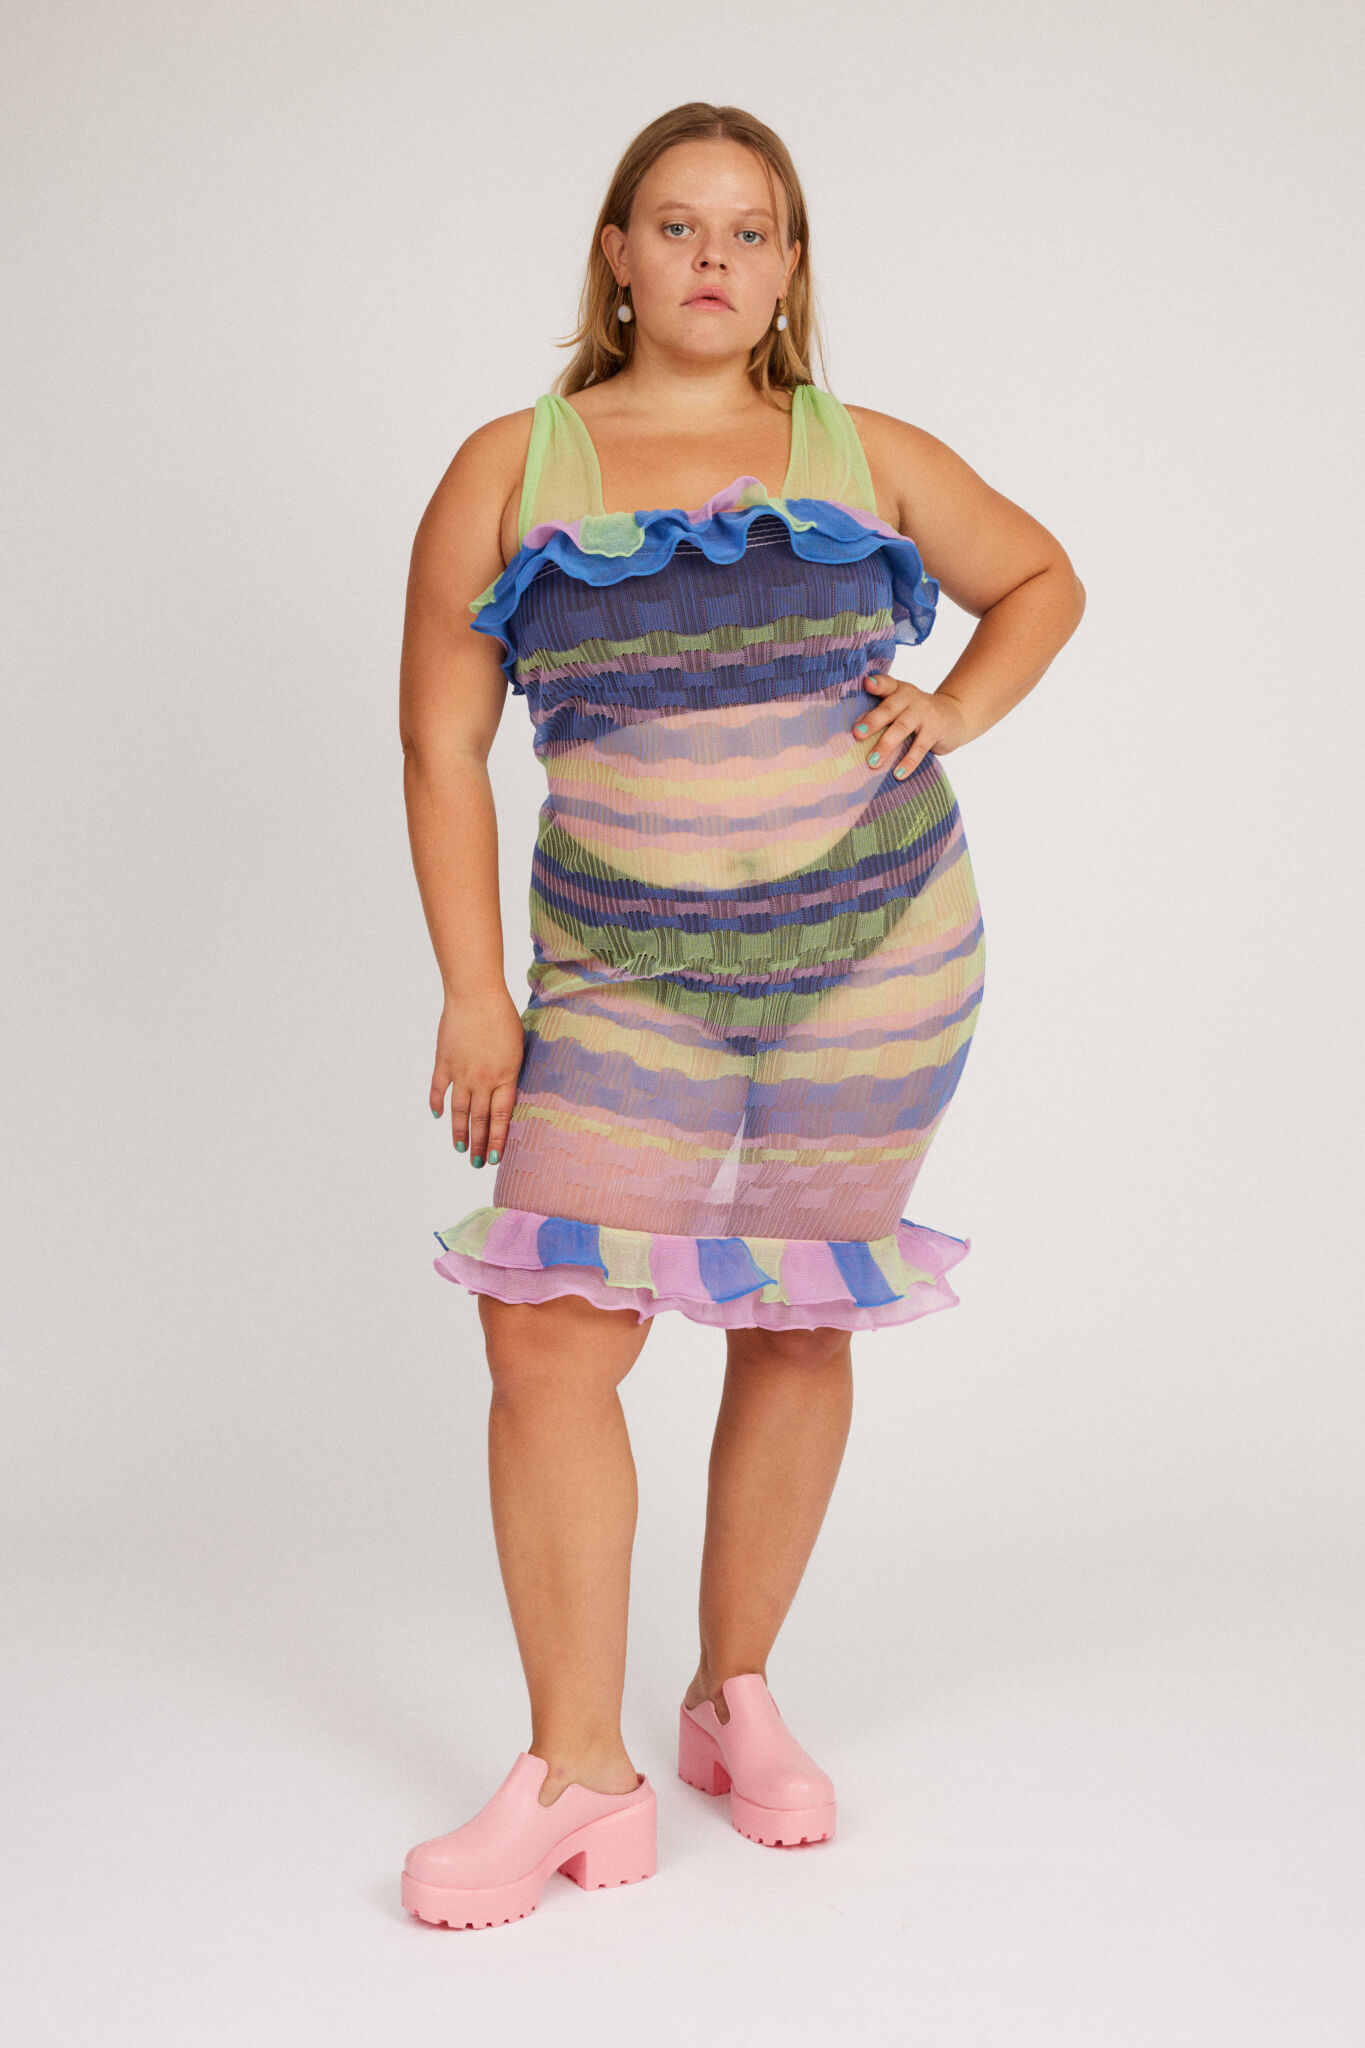 Loveable Dress in lilac and green is a transparent knitted strap dress in bold stripes with a ribbed bubble texture. The textile is lightweight, delicate and very flexible. The dress has a body fitted silhouette that adapts to the body. Detailed with frills.